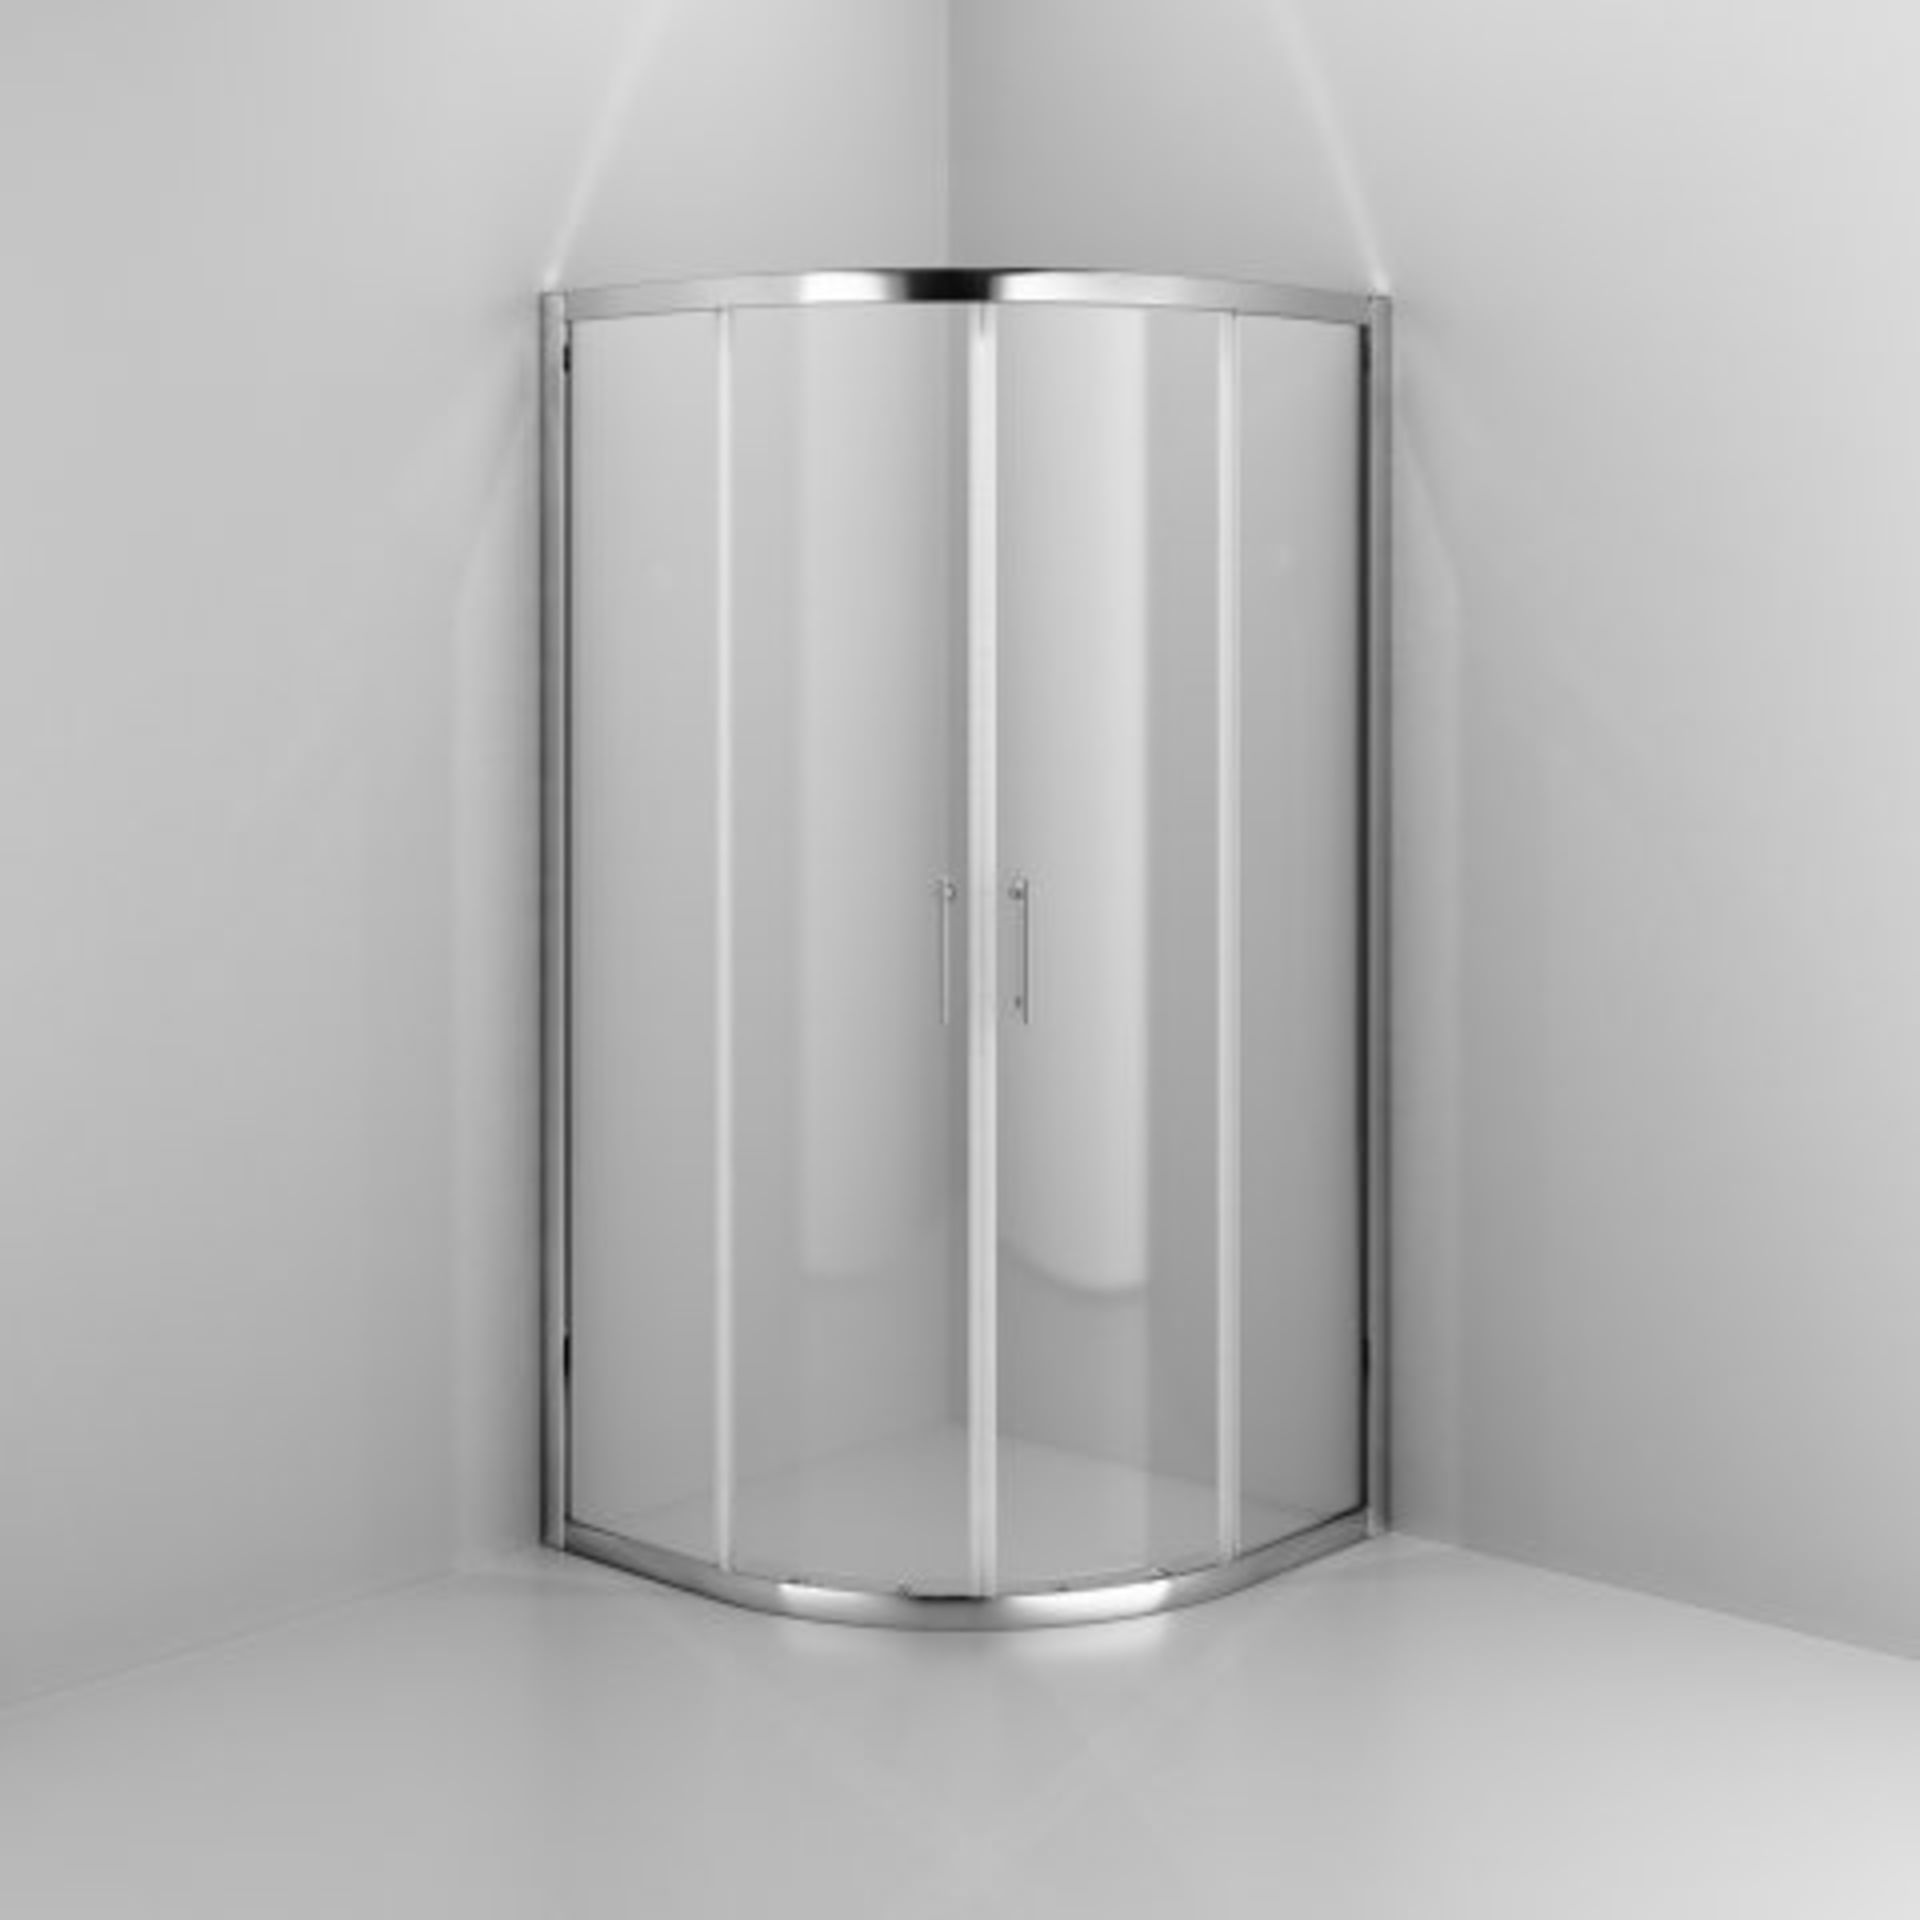 (O71) 900x900mm - 6mm - Elements Quadrant Shower Enclosure. RRP £272.99. Make the most of that - Image 5 of 5